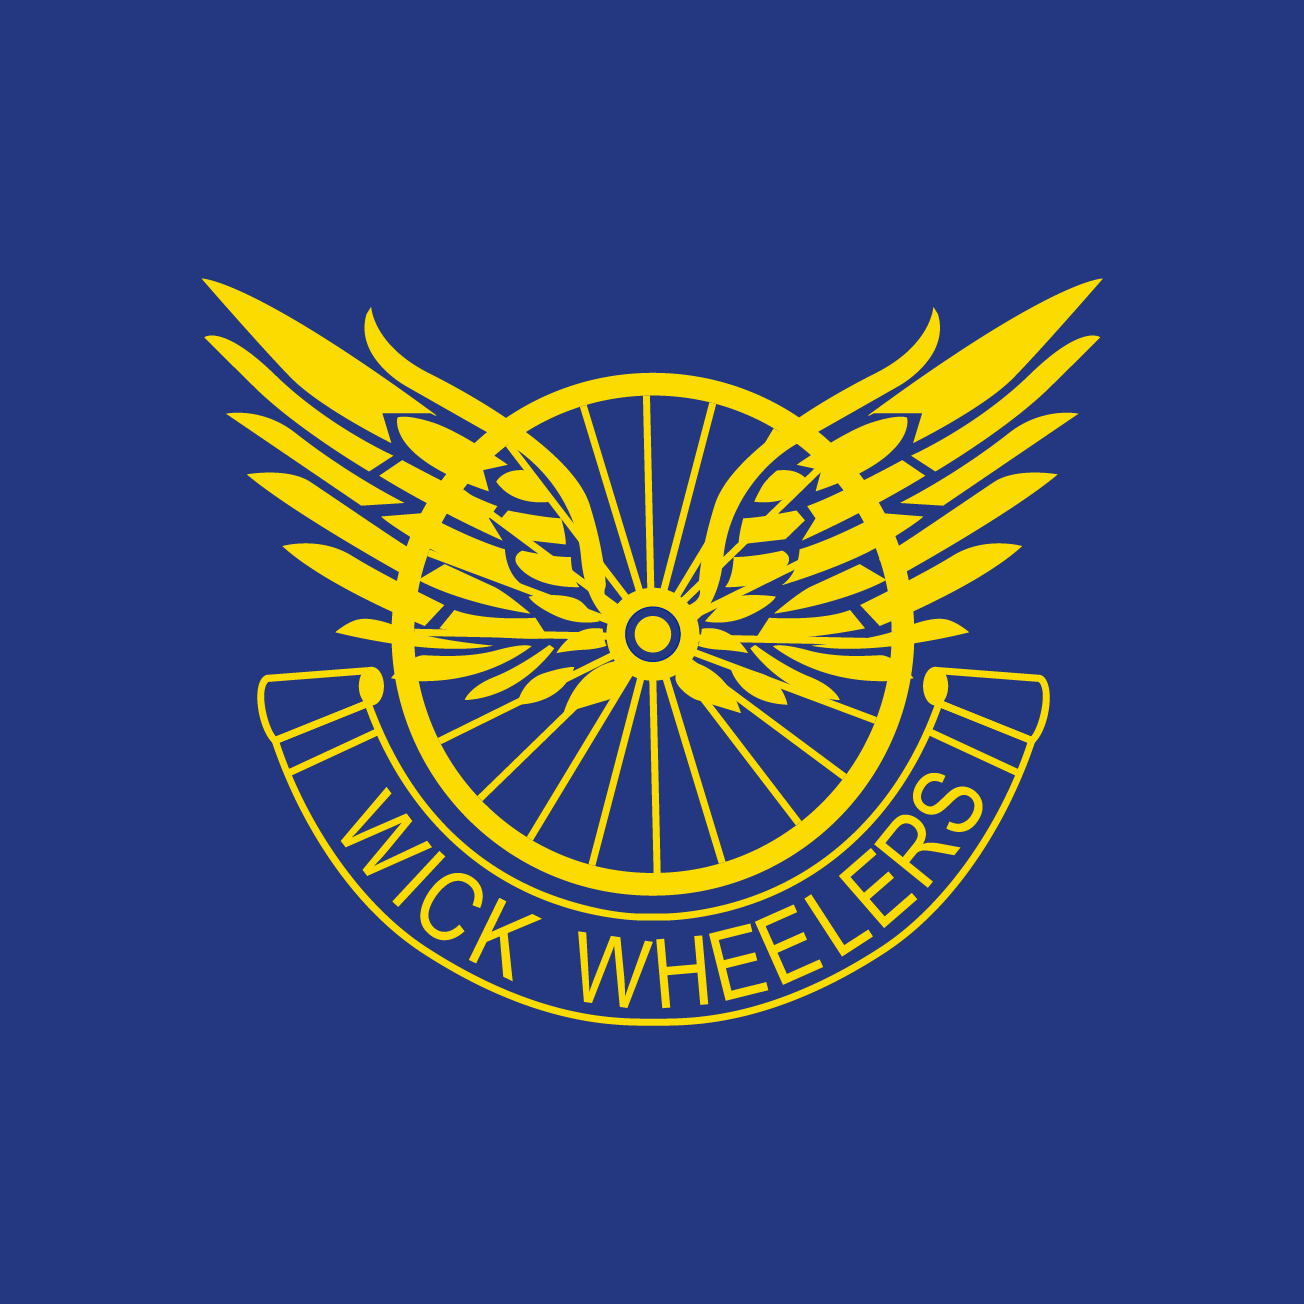 Club Image for WICK WHEELERS